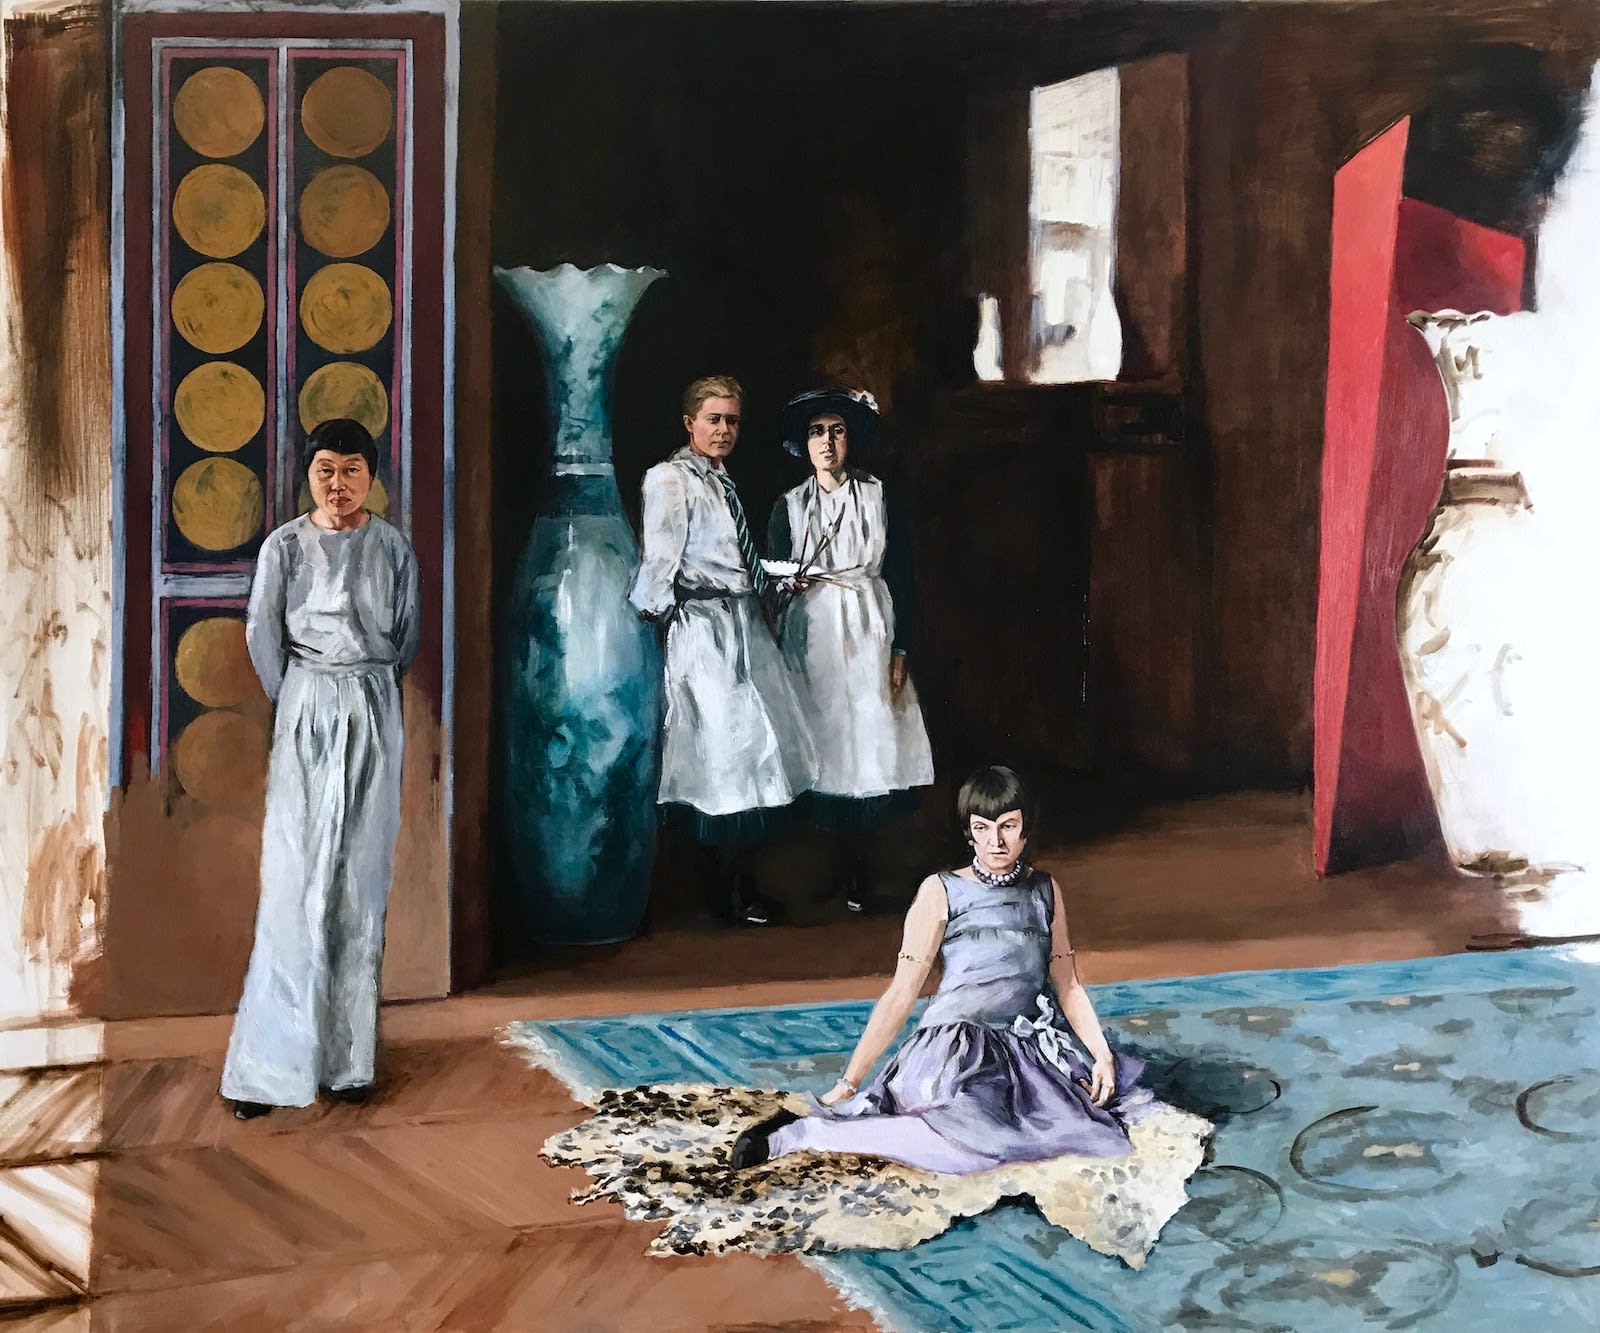 Coral Woodbury, Daughters of Unfinished History: Asawa, Thesleff, Bell, Vincenzo, 2019